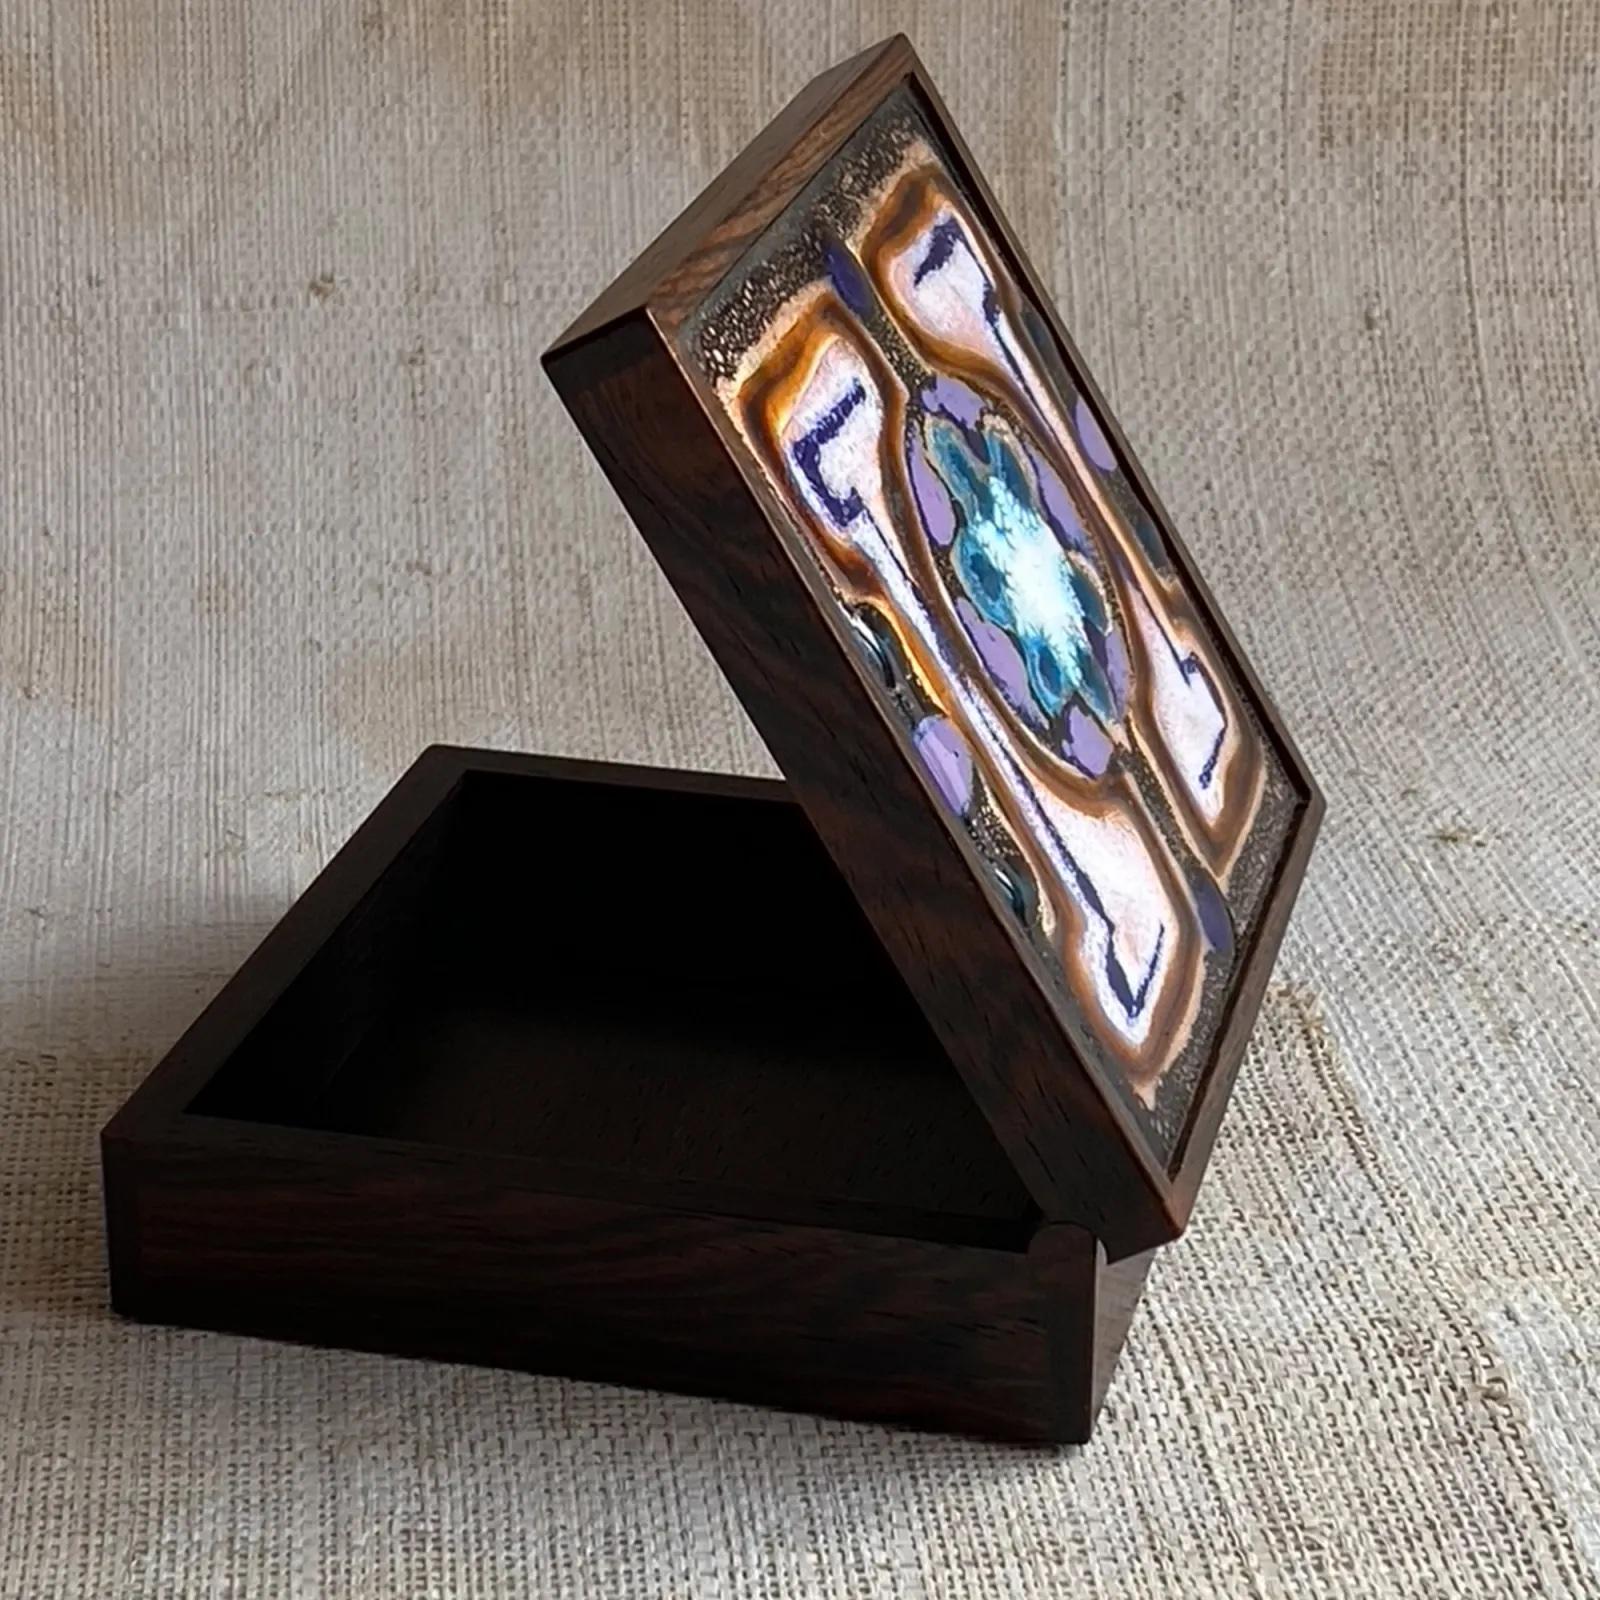 Very high quality rosewood box inset with an enamel on copper decorative panel.
Marked ‘Klitgaard’ Denmark for Alfred Klitgaard who was a postwar Danish artist whose work in enamel is now highly collectable.
11cm Square.